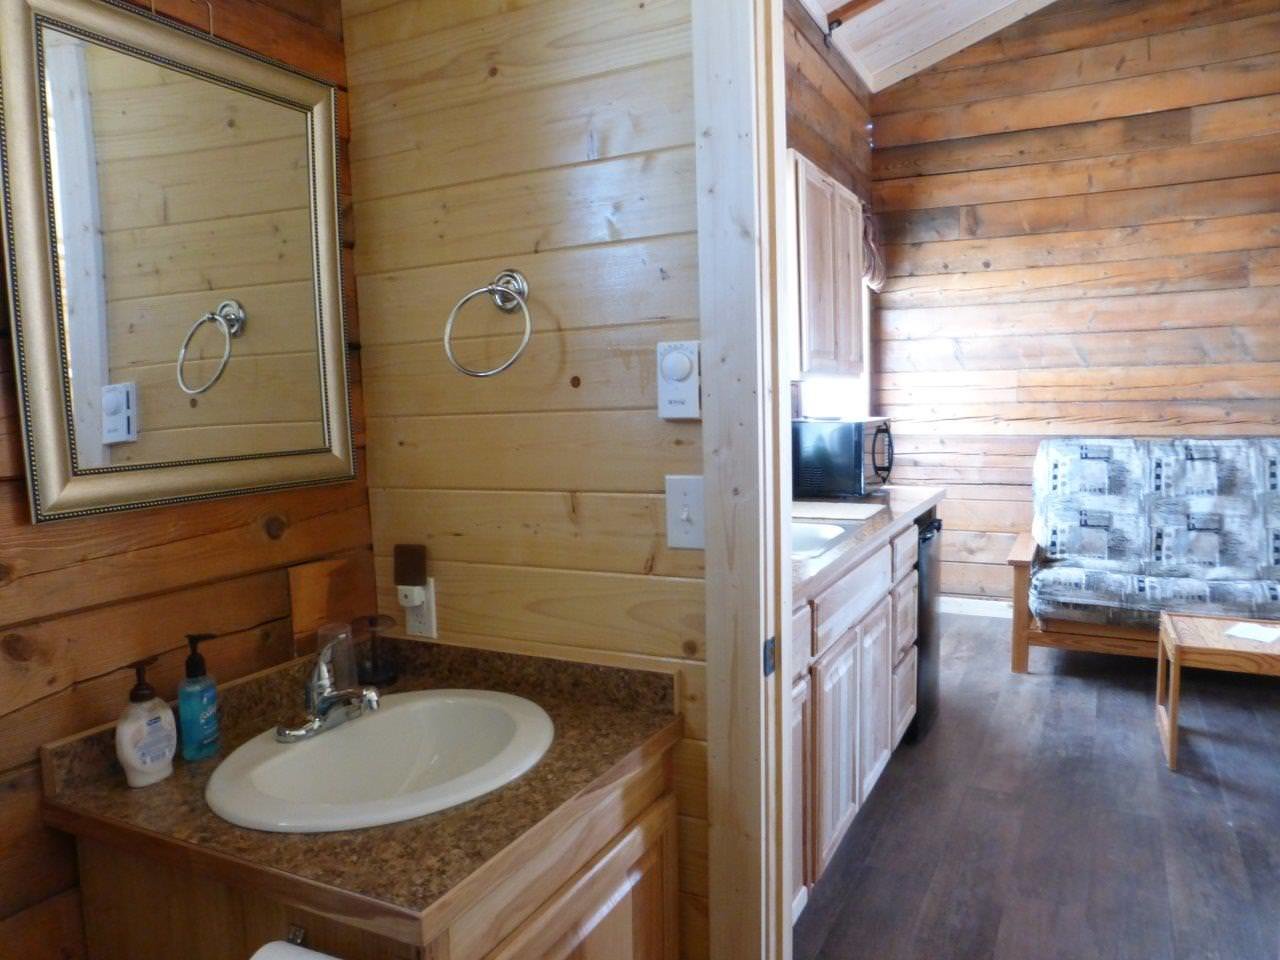 Inside Sperry cabin with washroom and kitchen.